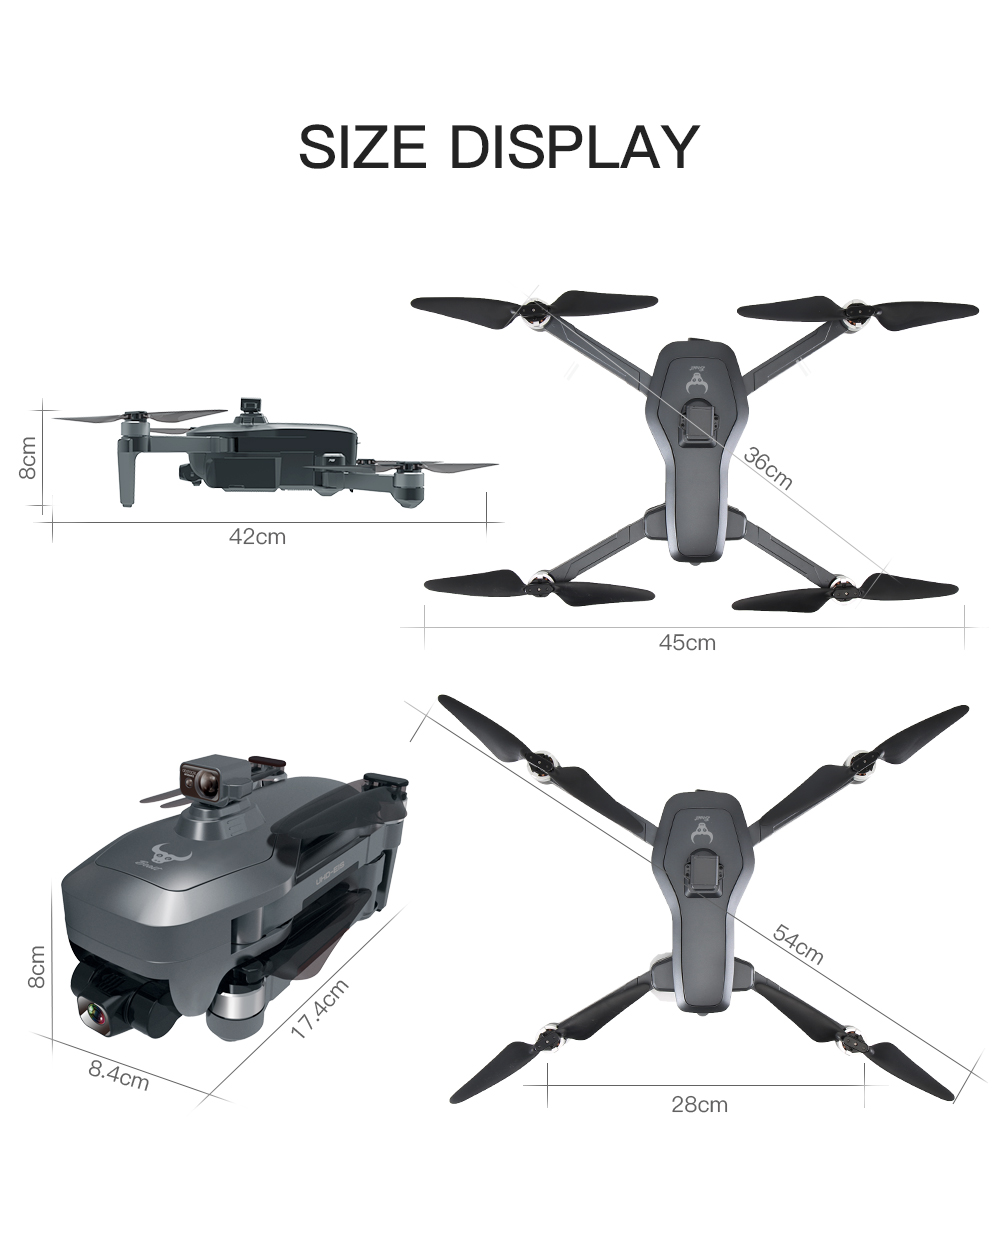 ZLL SG906 MAX GPS 5G WIFI FPV With 4K HD Camera 3-Axis EIS Anti-shake Gimbal Obstacle Avoidance Brushless Foldable RC Drone Quadcopter RTF 148